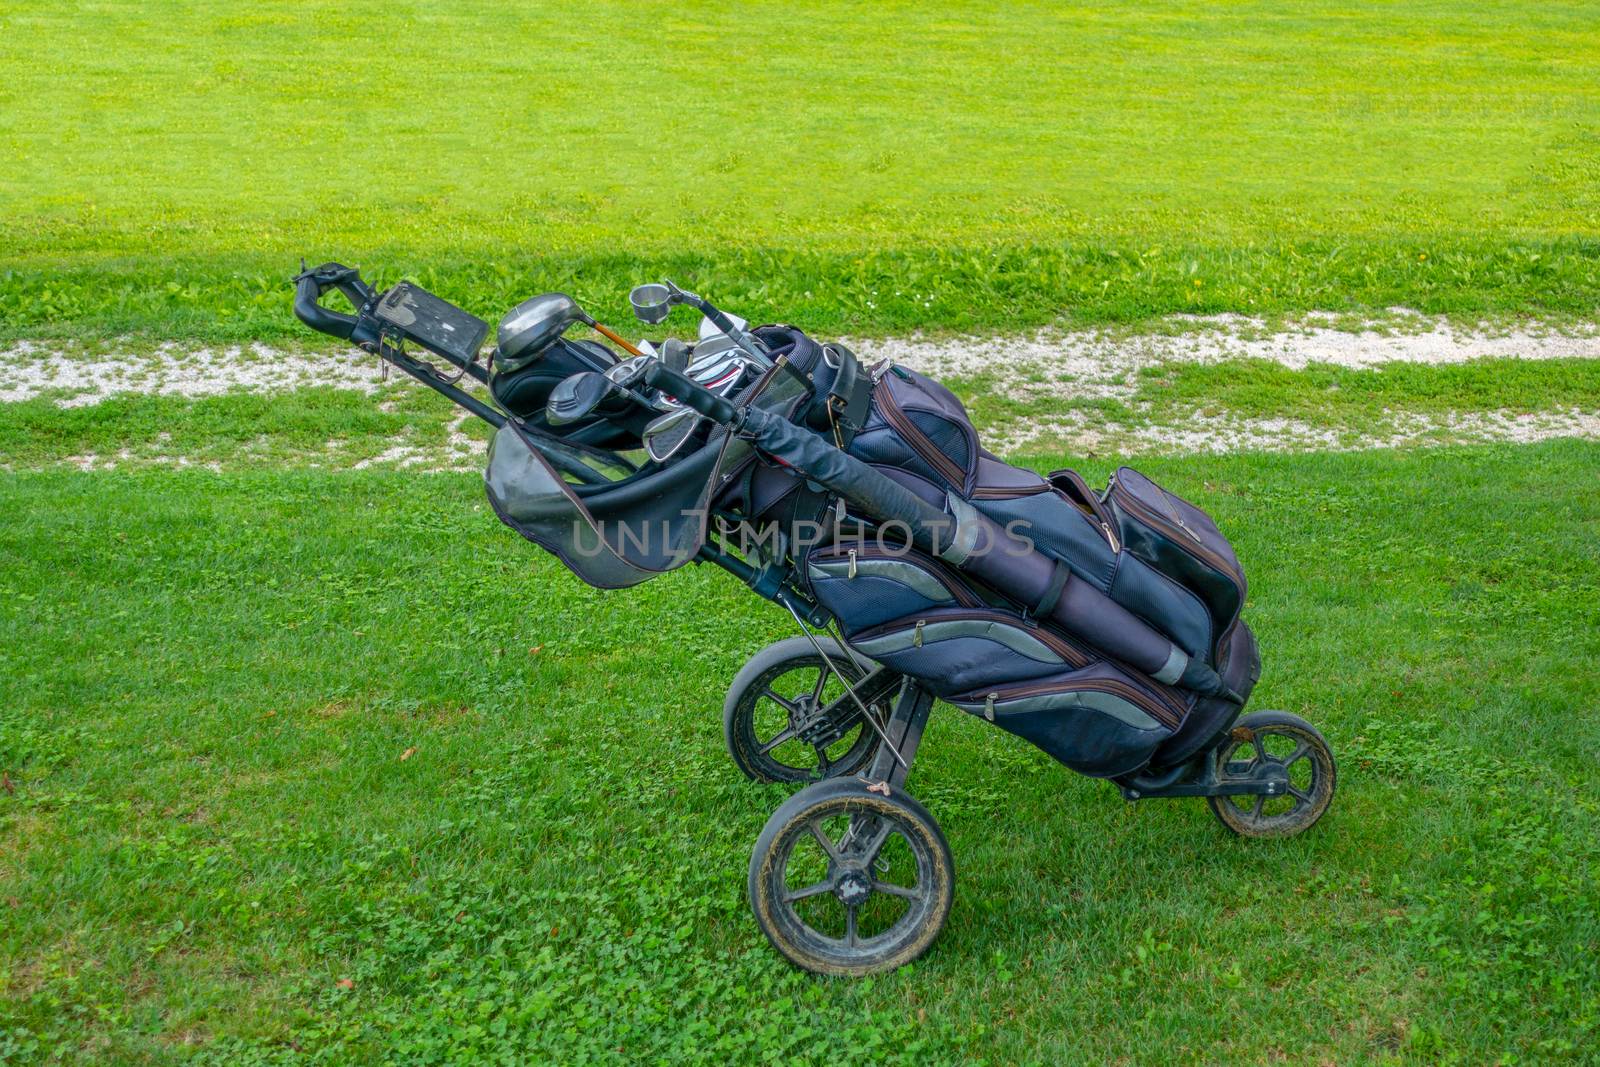 Golf bag with clubs on roller stand on golf course, authentic, not staged, after plaz with muddy wheels